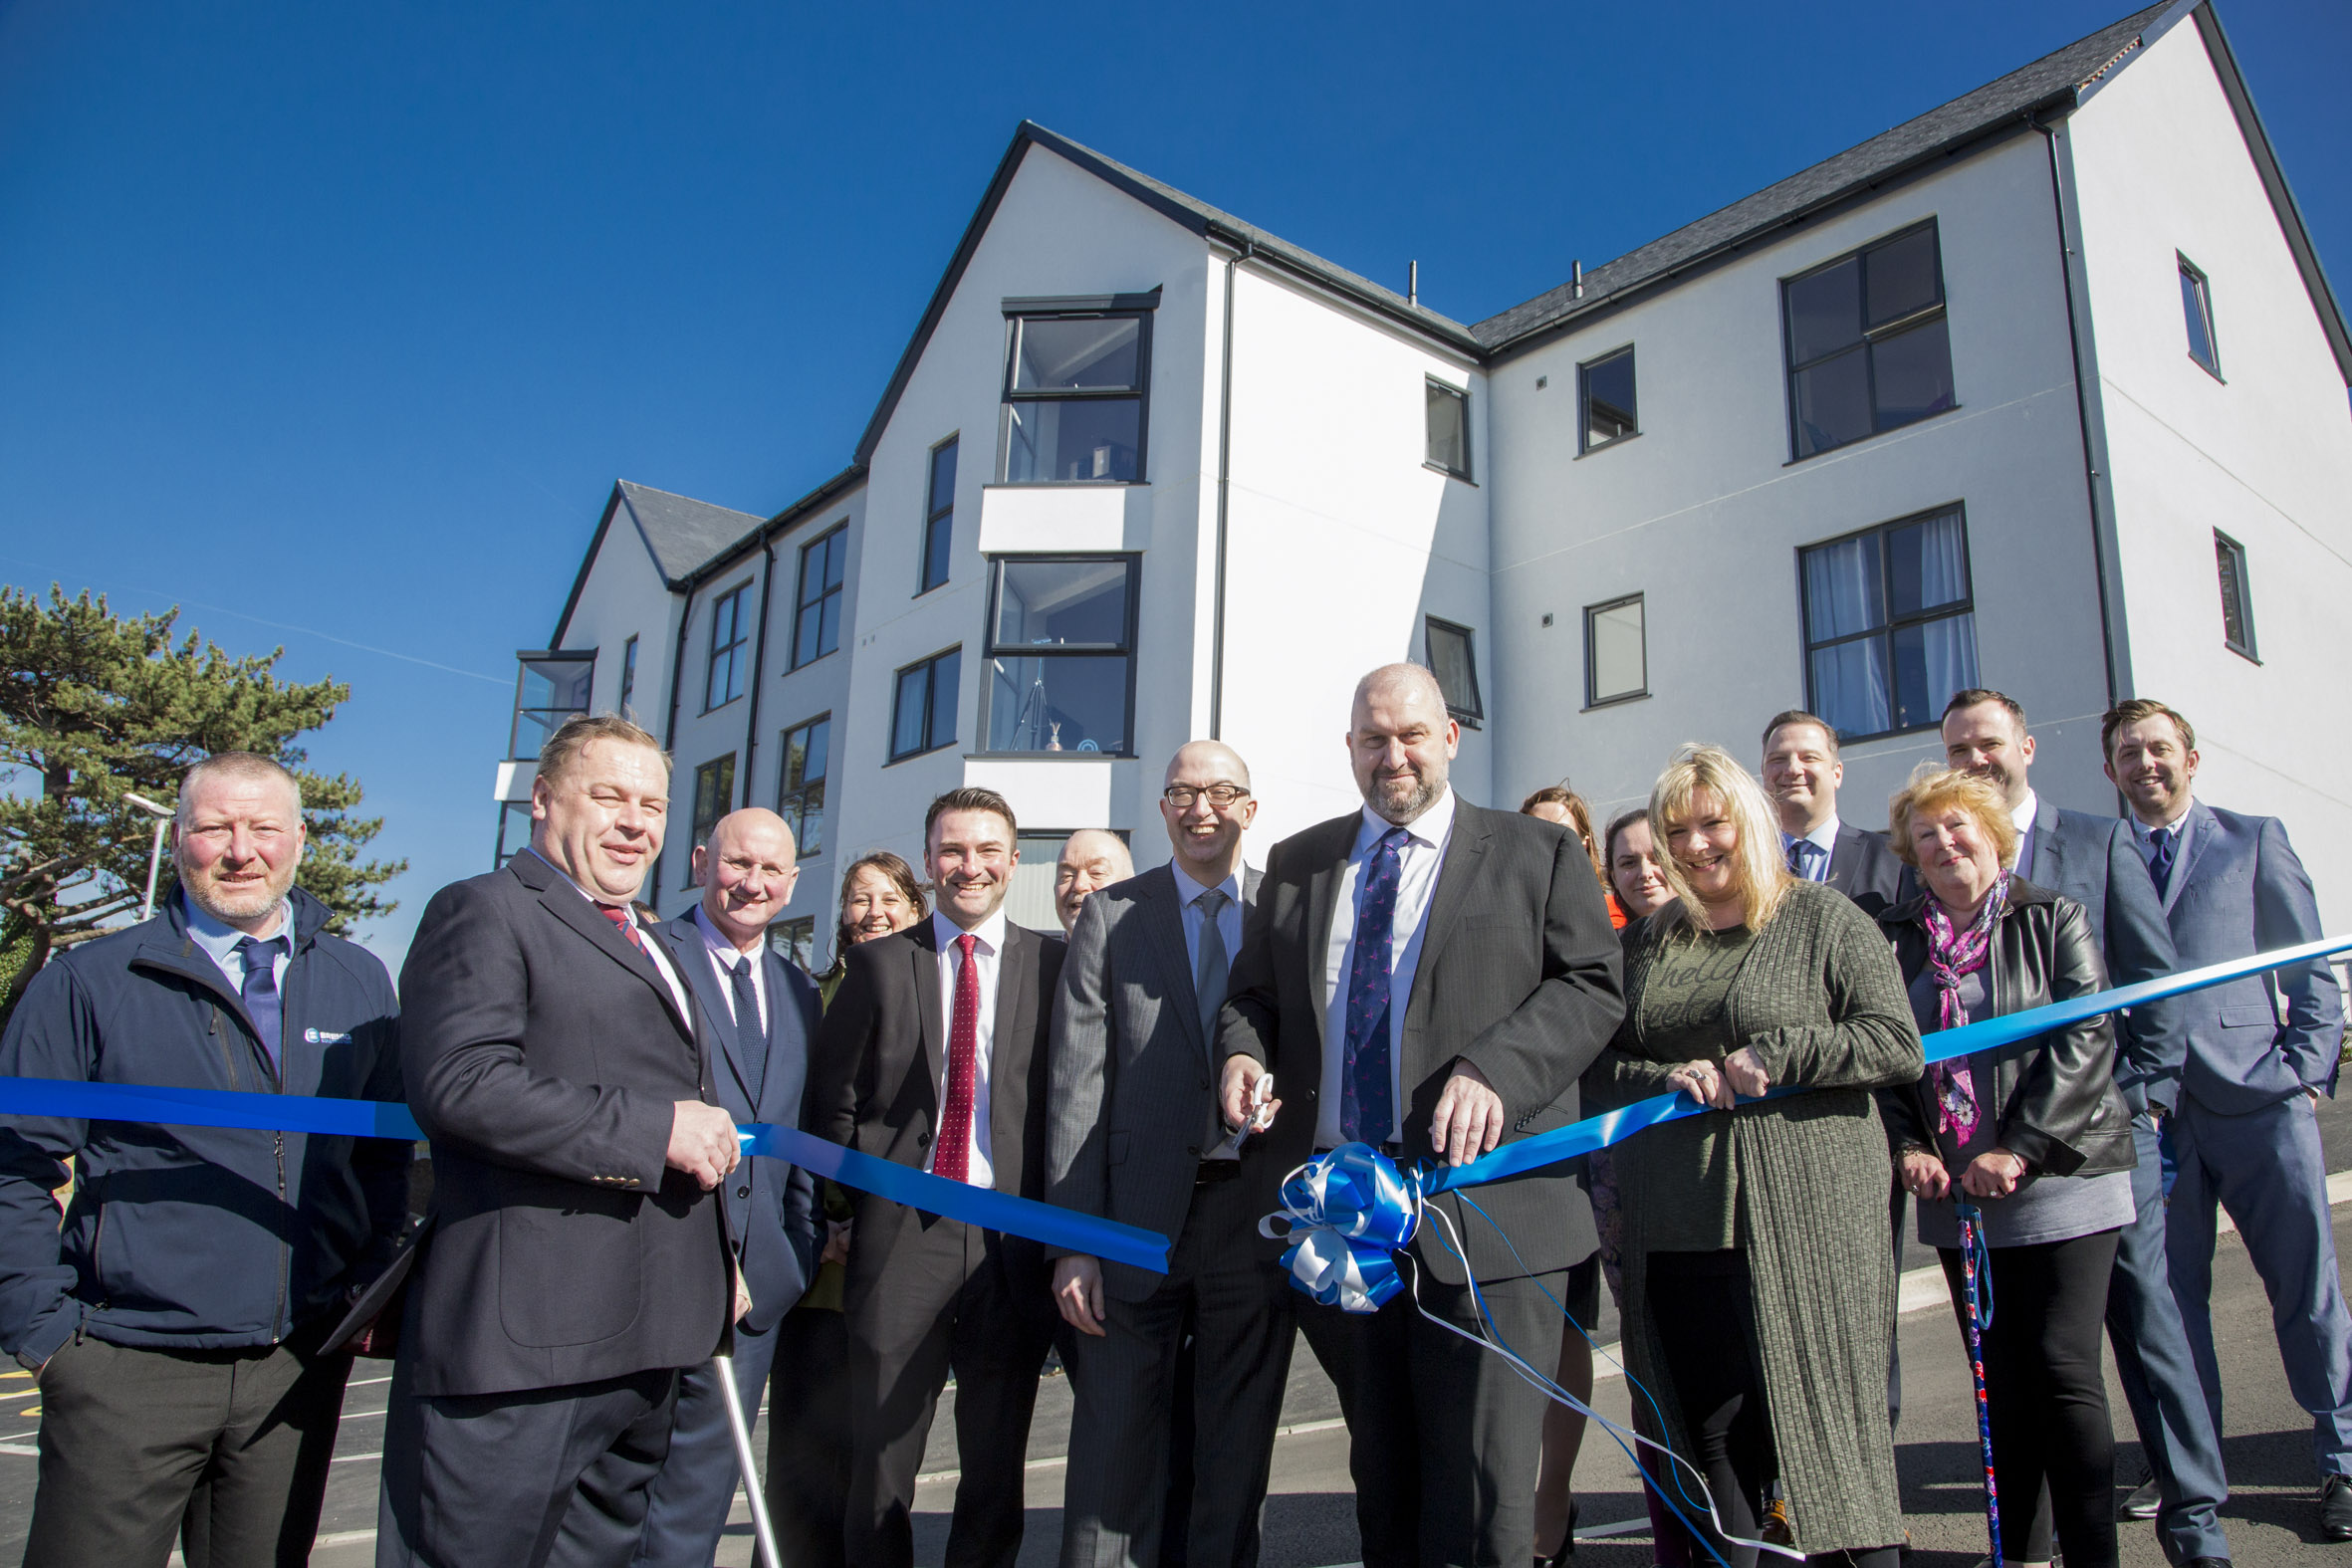 Nurse is guest of honour at launch of flagship £3.5m affordable homes scheme